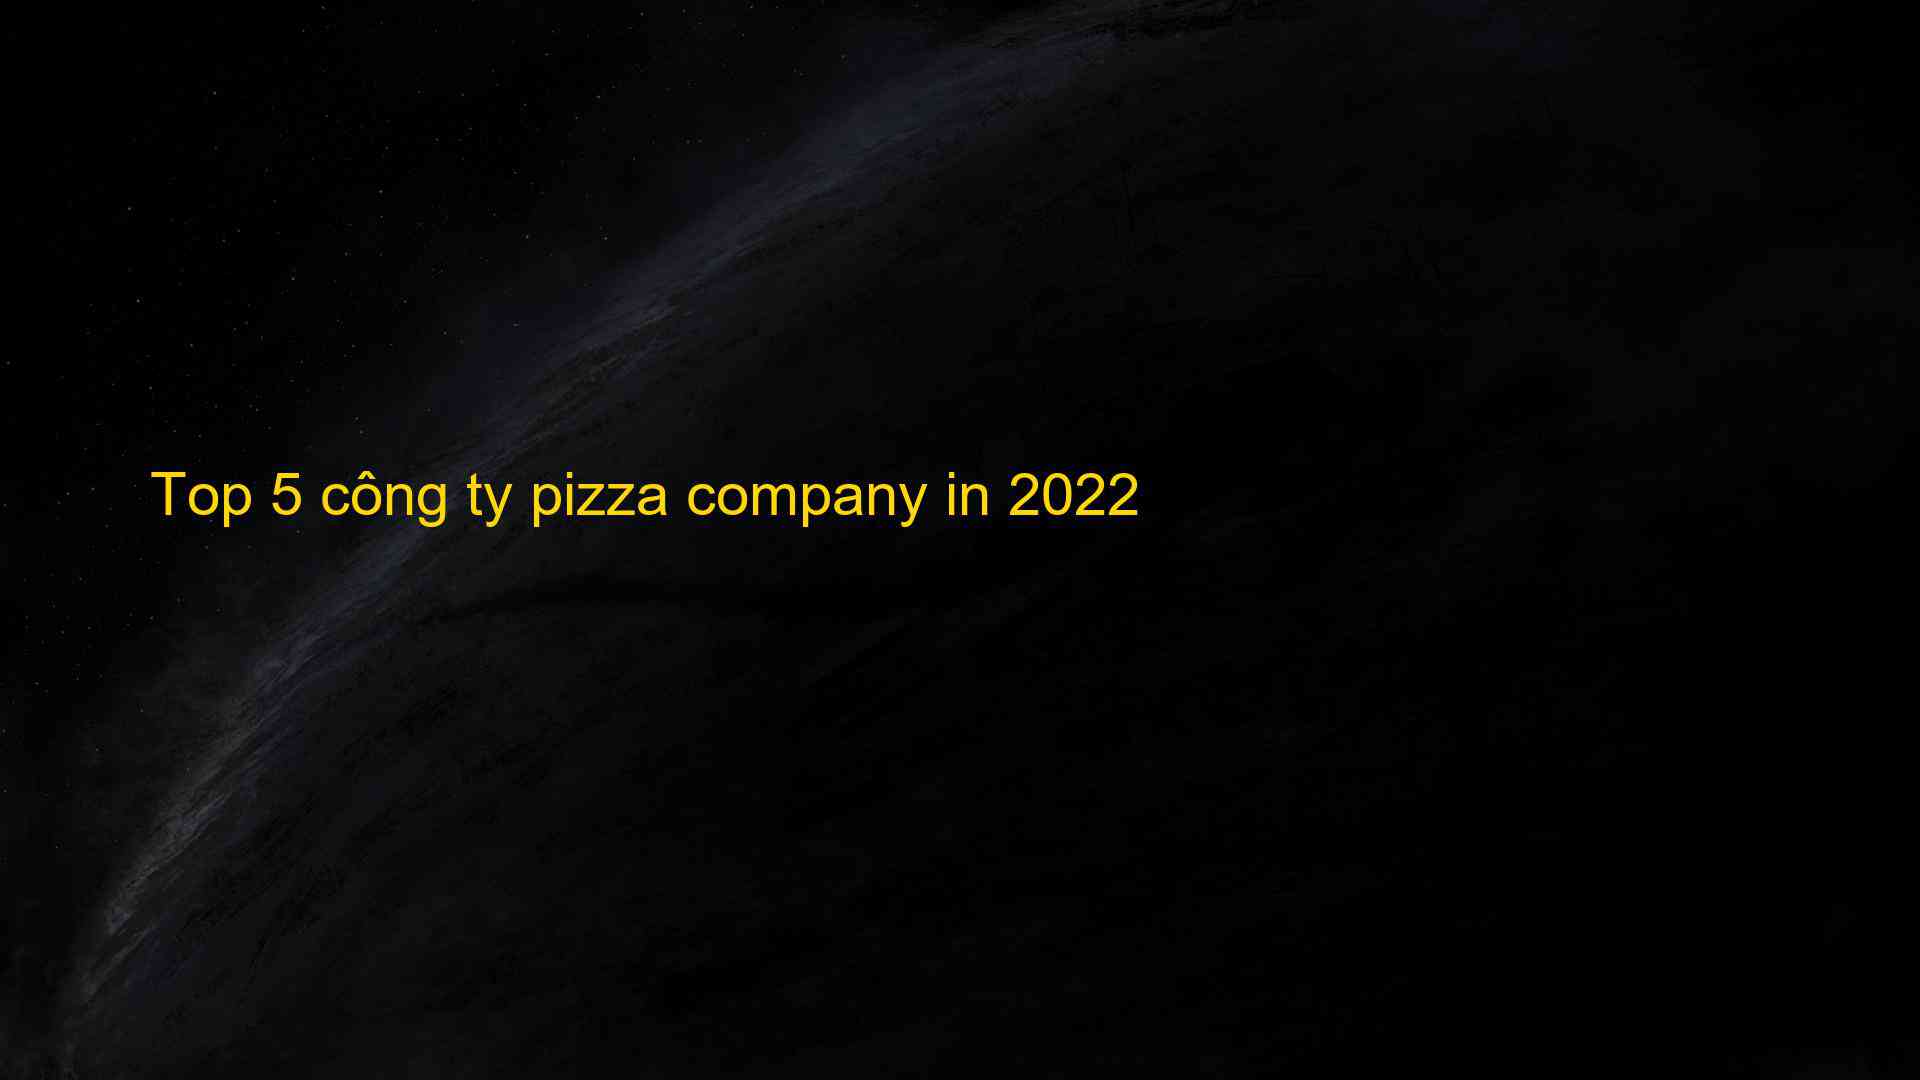 Top 5 cong ty pizza company in 2022 1660105582